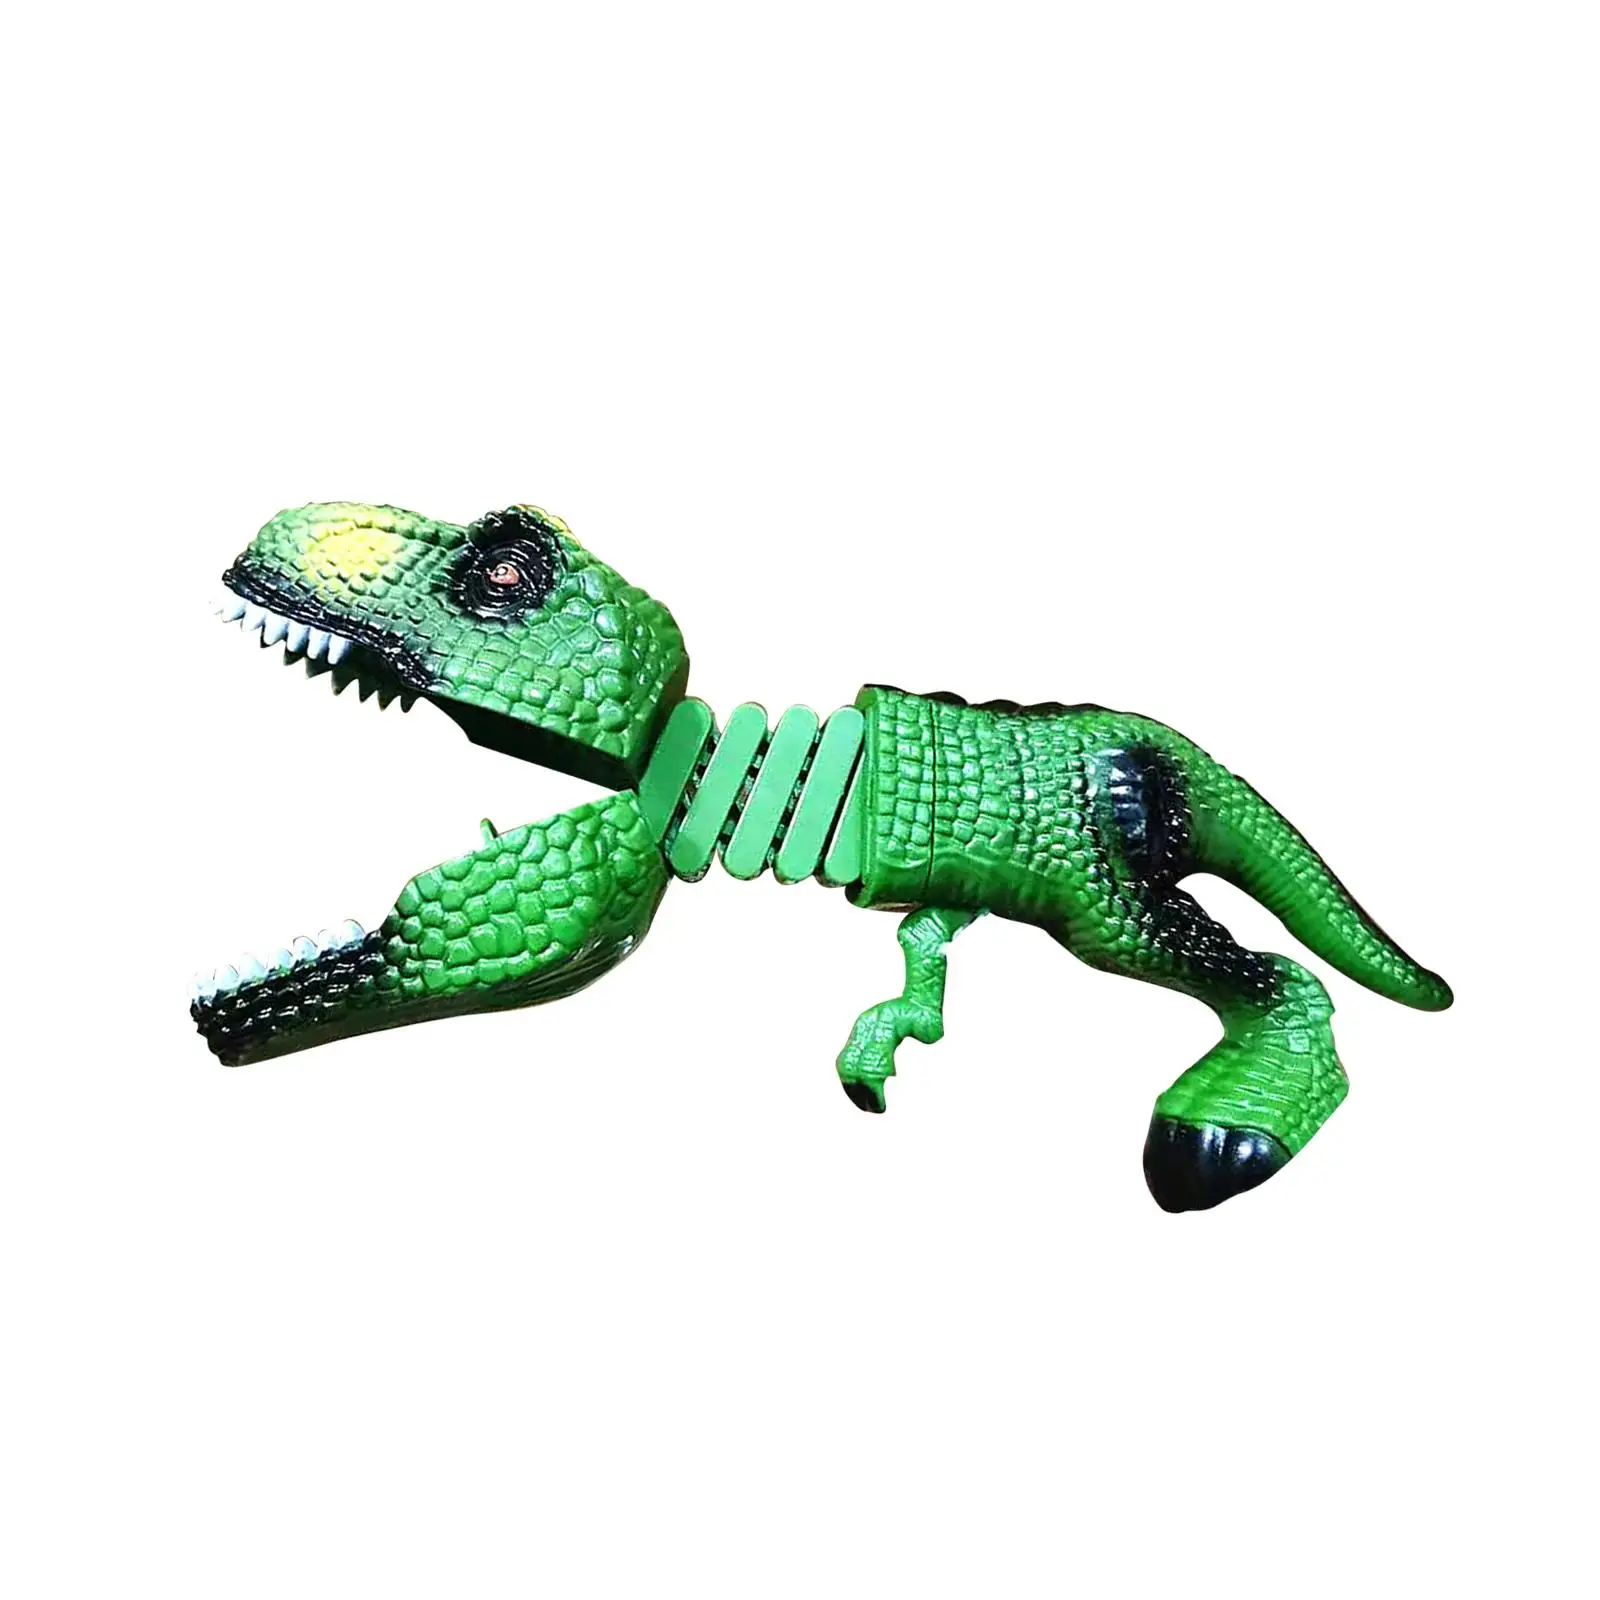 Pick Up Learning Toy Dinosaur Figures for Kids Birthday Present